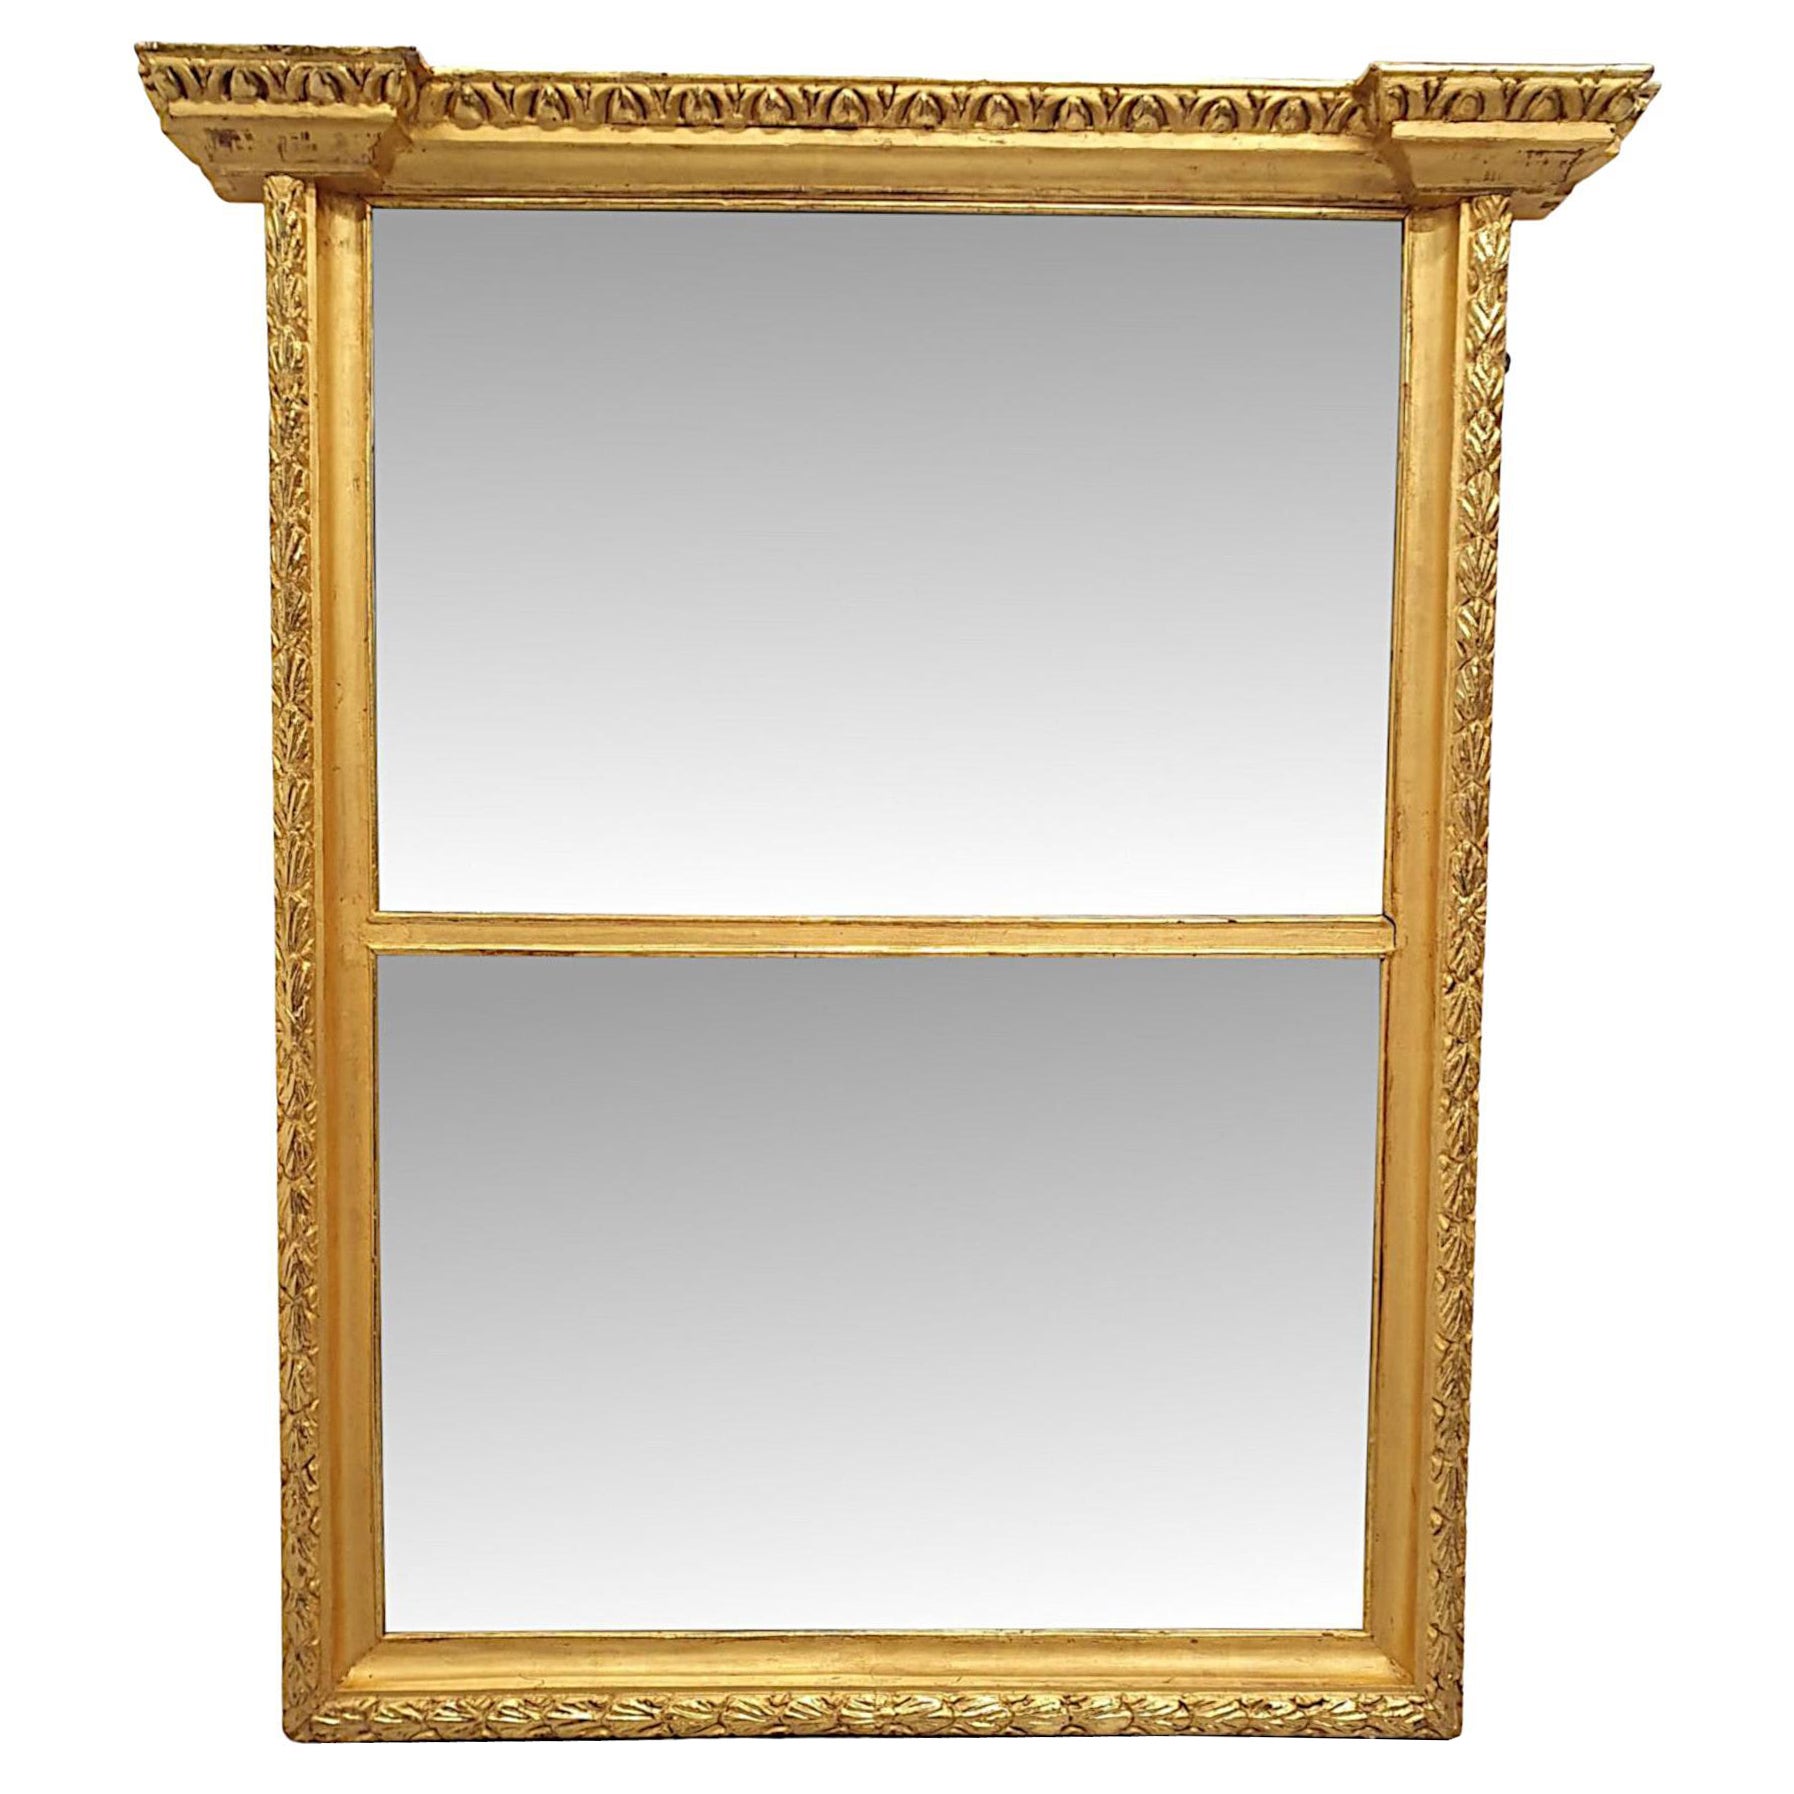 A Very Fine and Unusual 19th Century Compartmental Overmantle Mirror For Sale